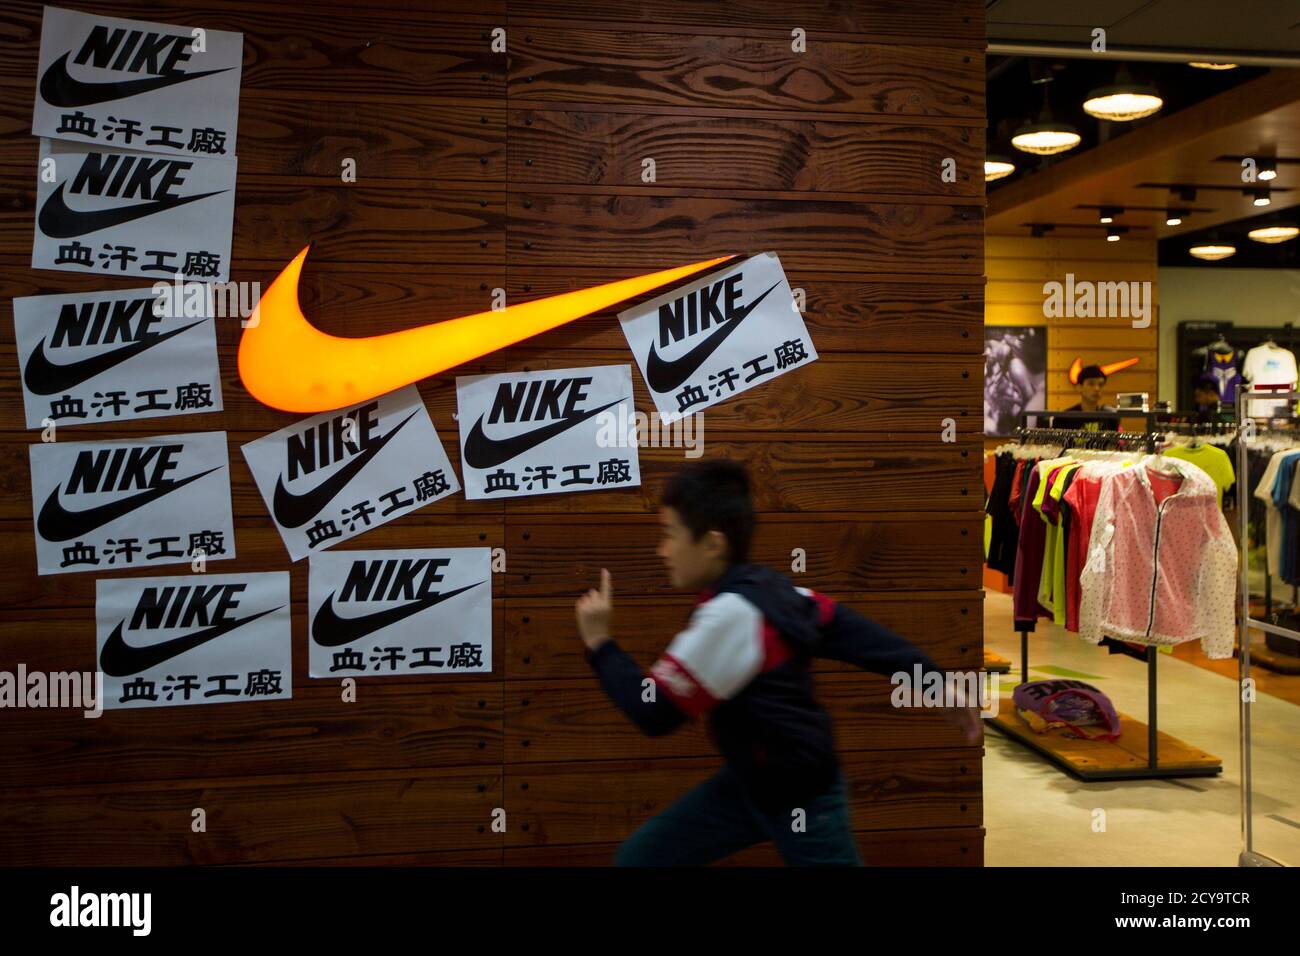 Nike Protests High Resolution Stock Photography and Images - Alamy